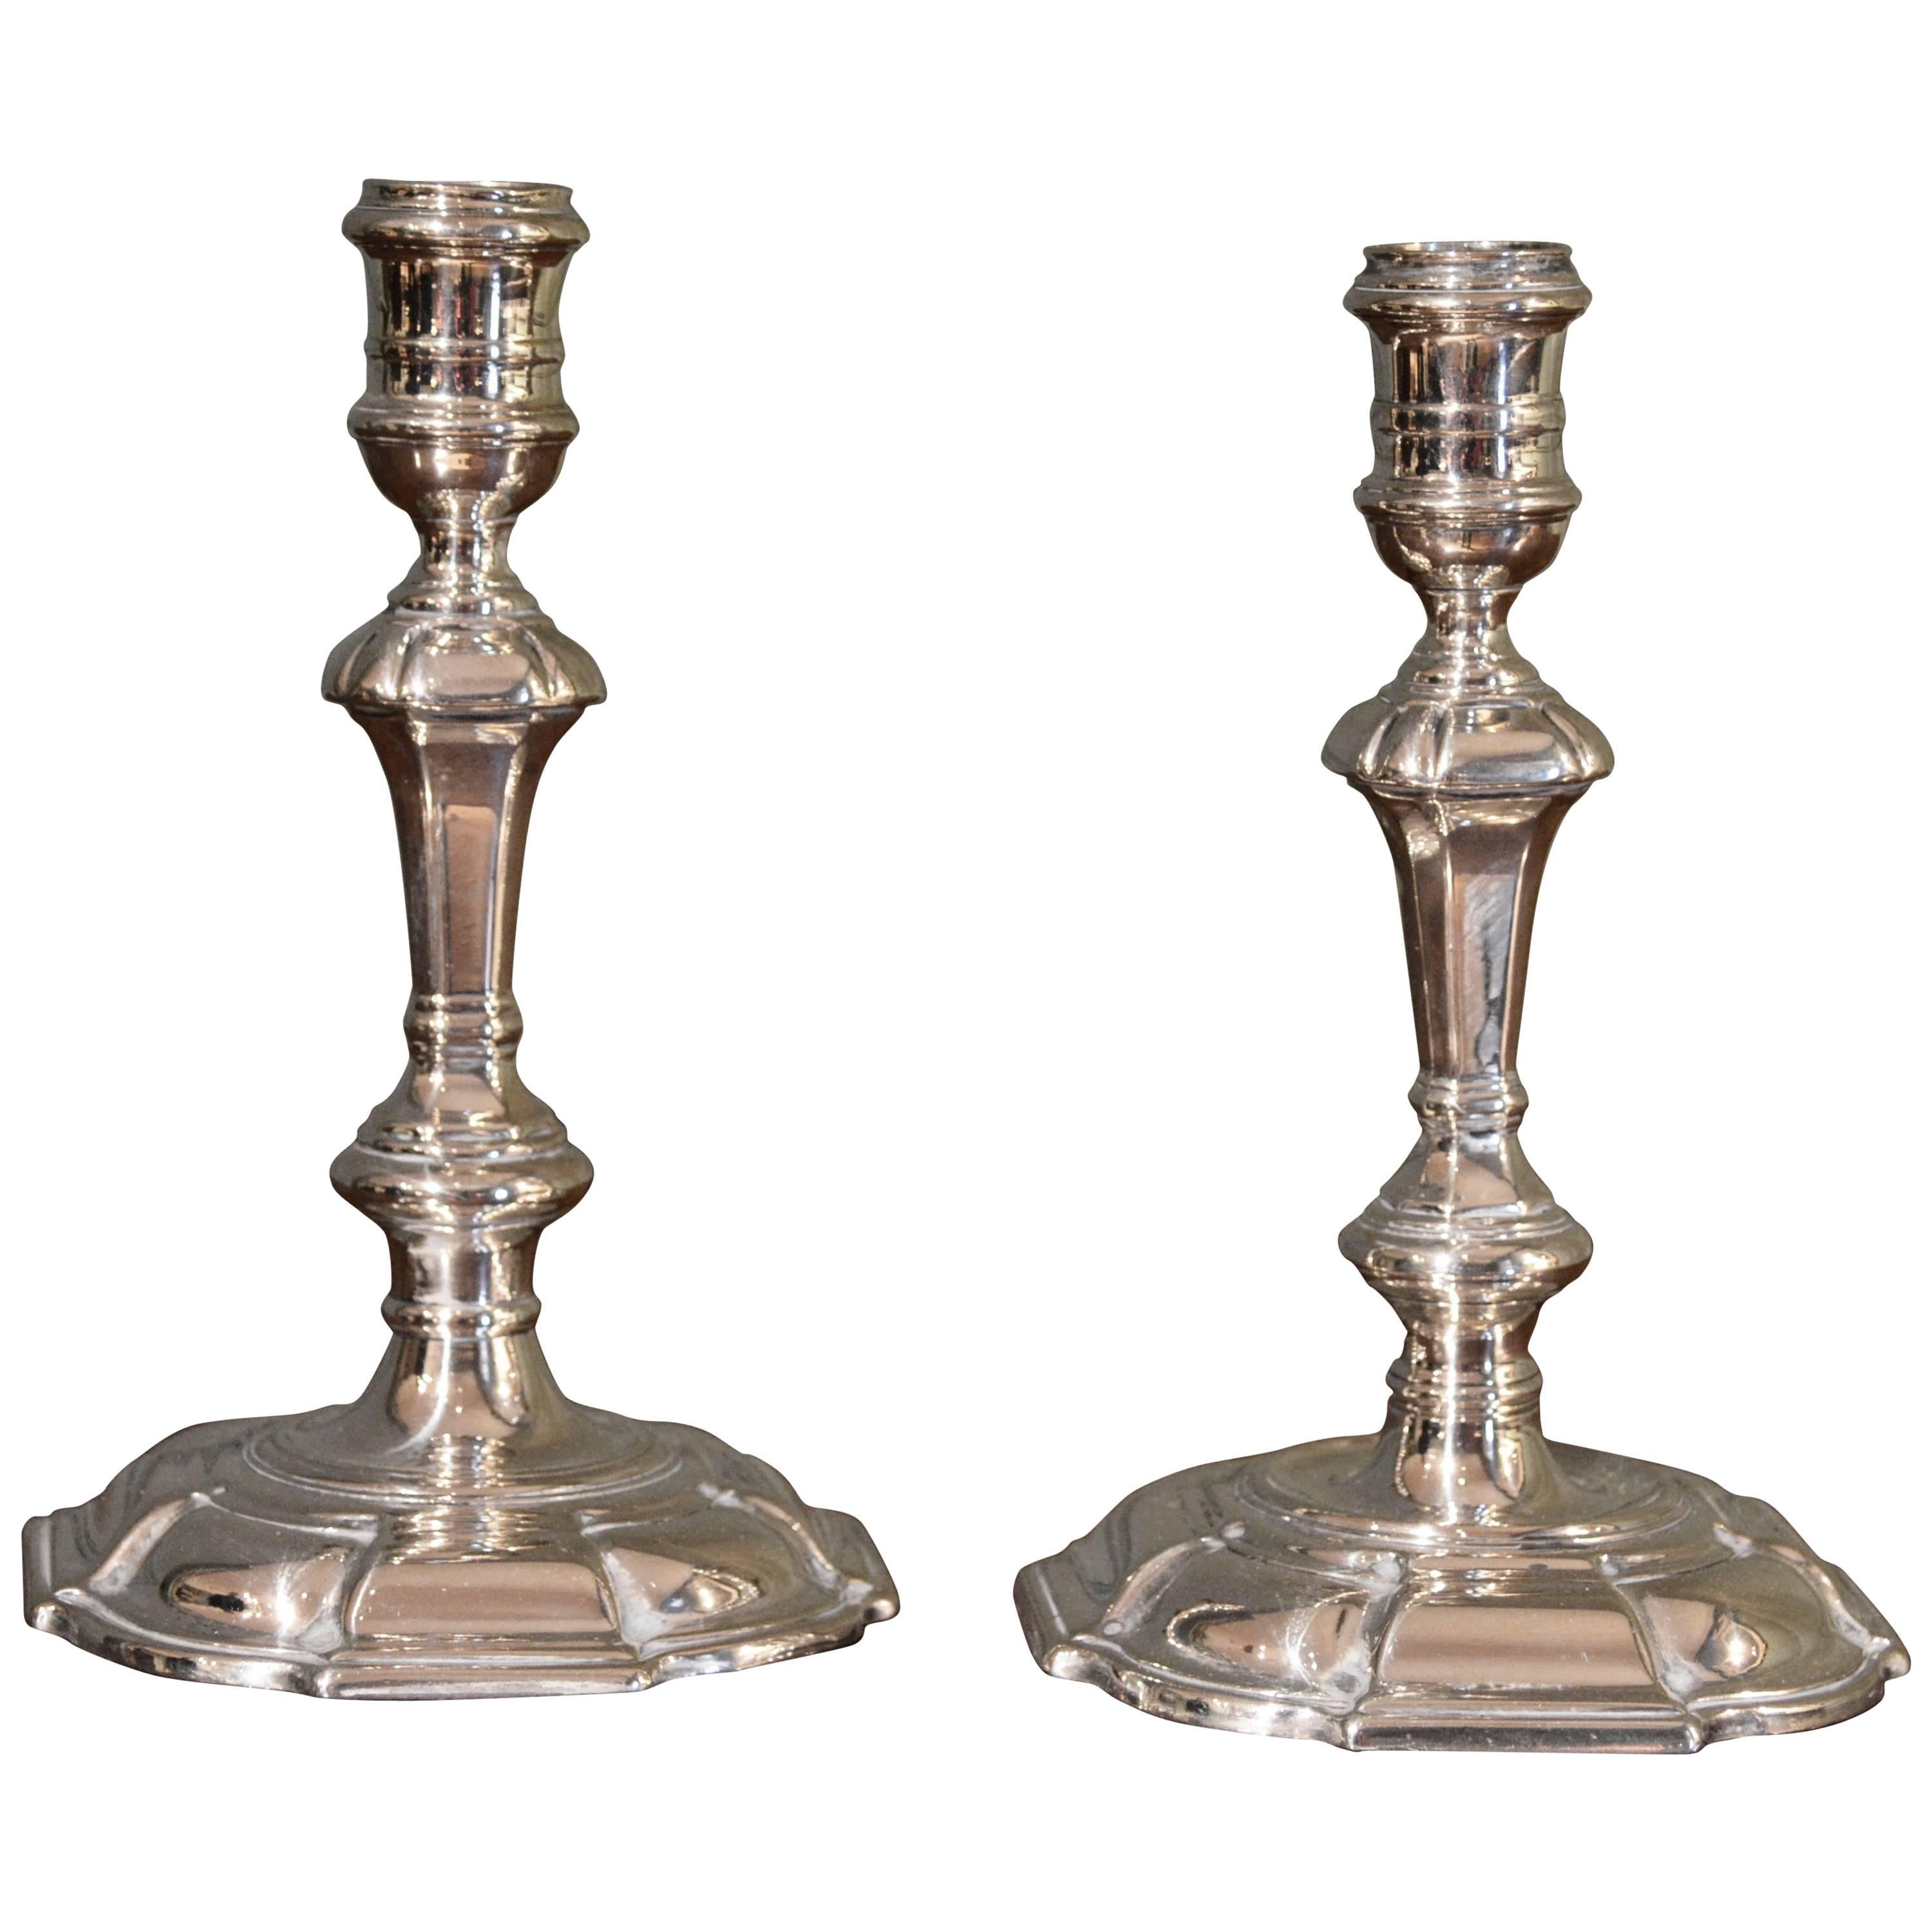 Matched Pair of 18th Century Silver Candlesticks